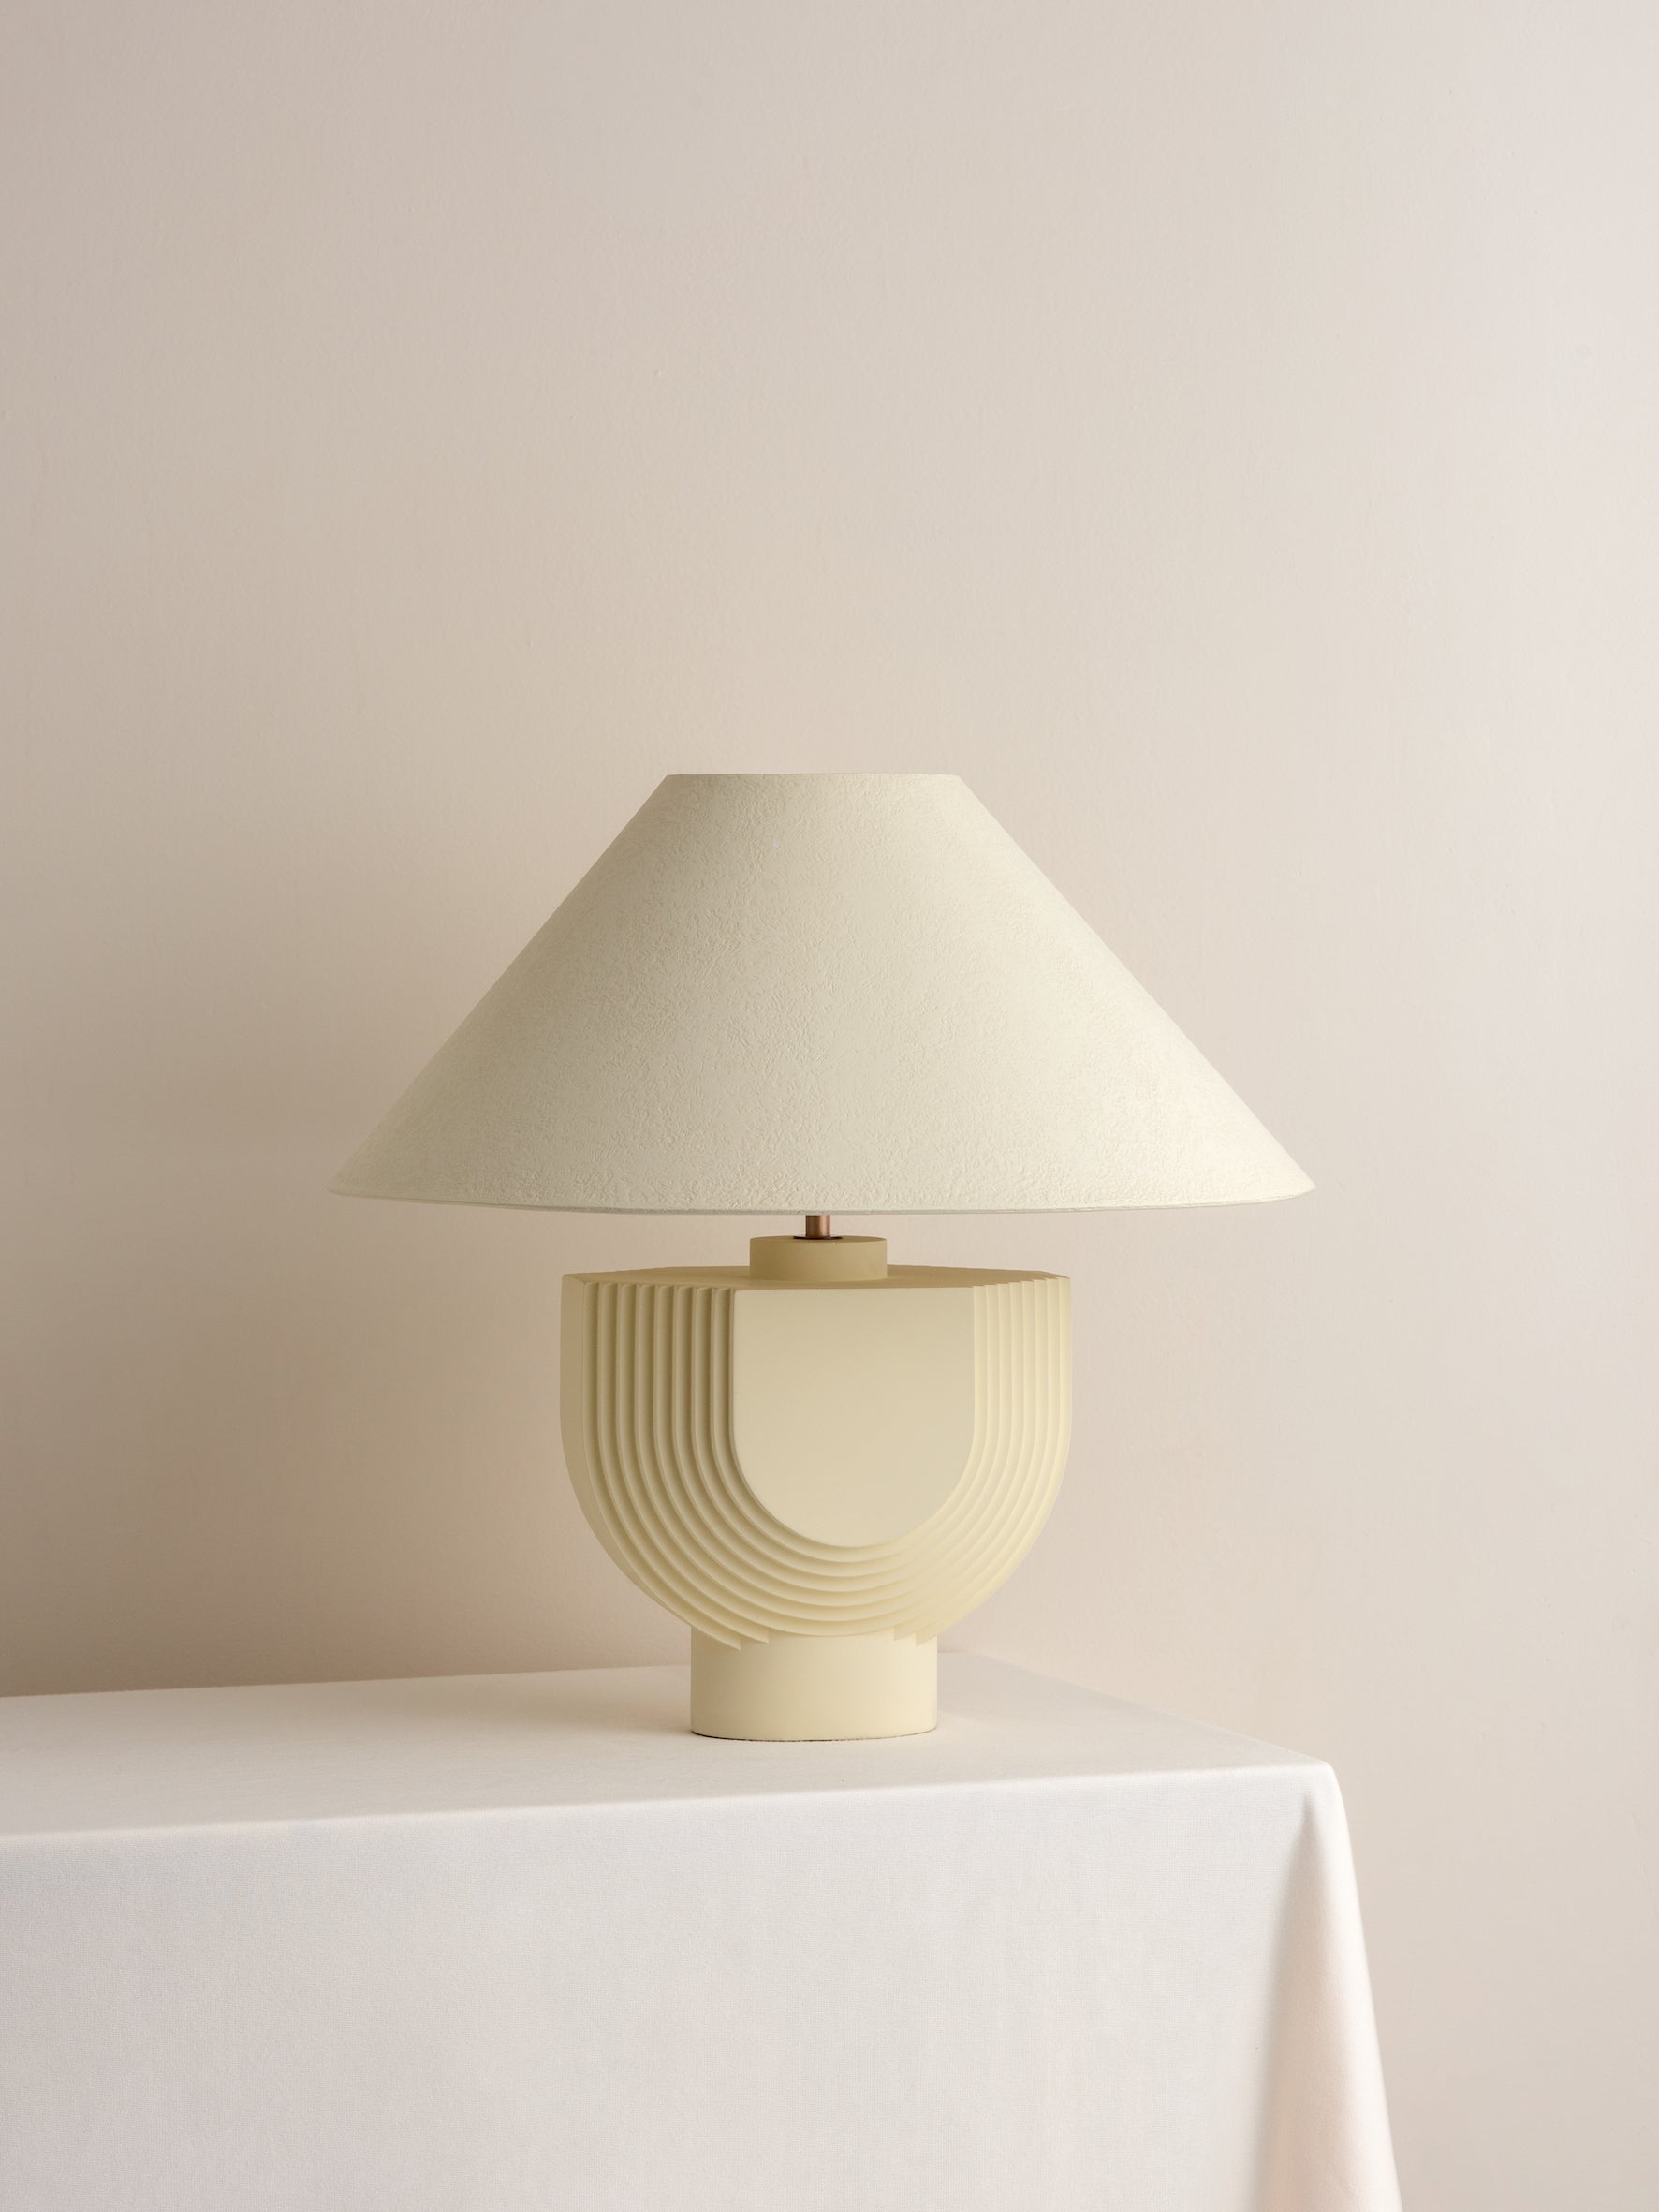 Editions concrete lamp with + plaster shade | Table Lamp | Lights & Lamps | UK | Modern Affordable Designer Lighting